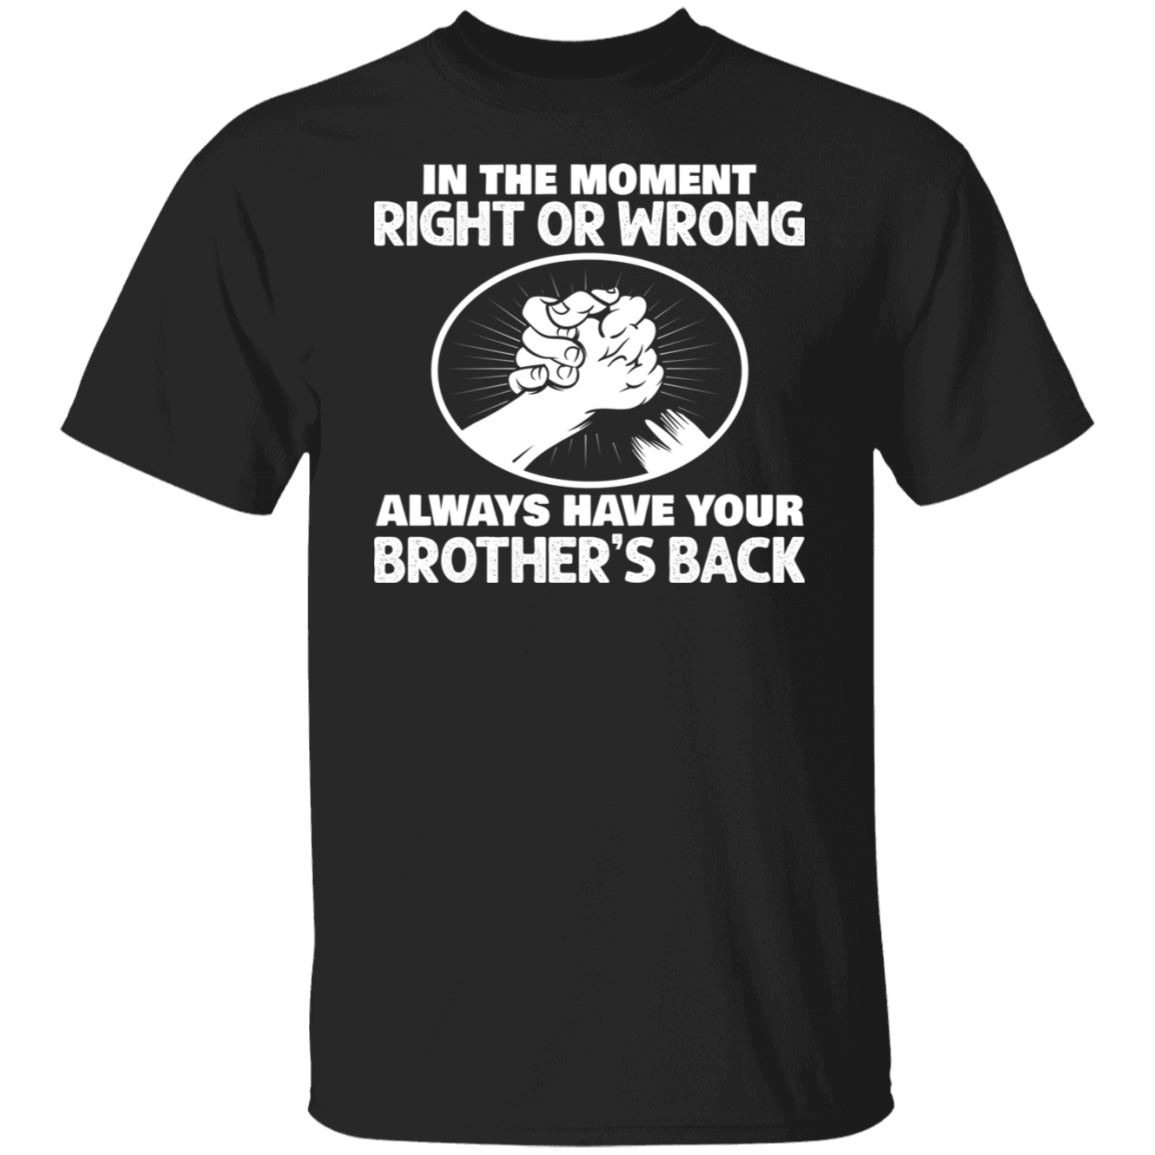 In the moment, right or wrong, always have your brother’s back Biker Shirt